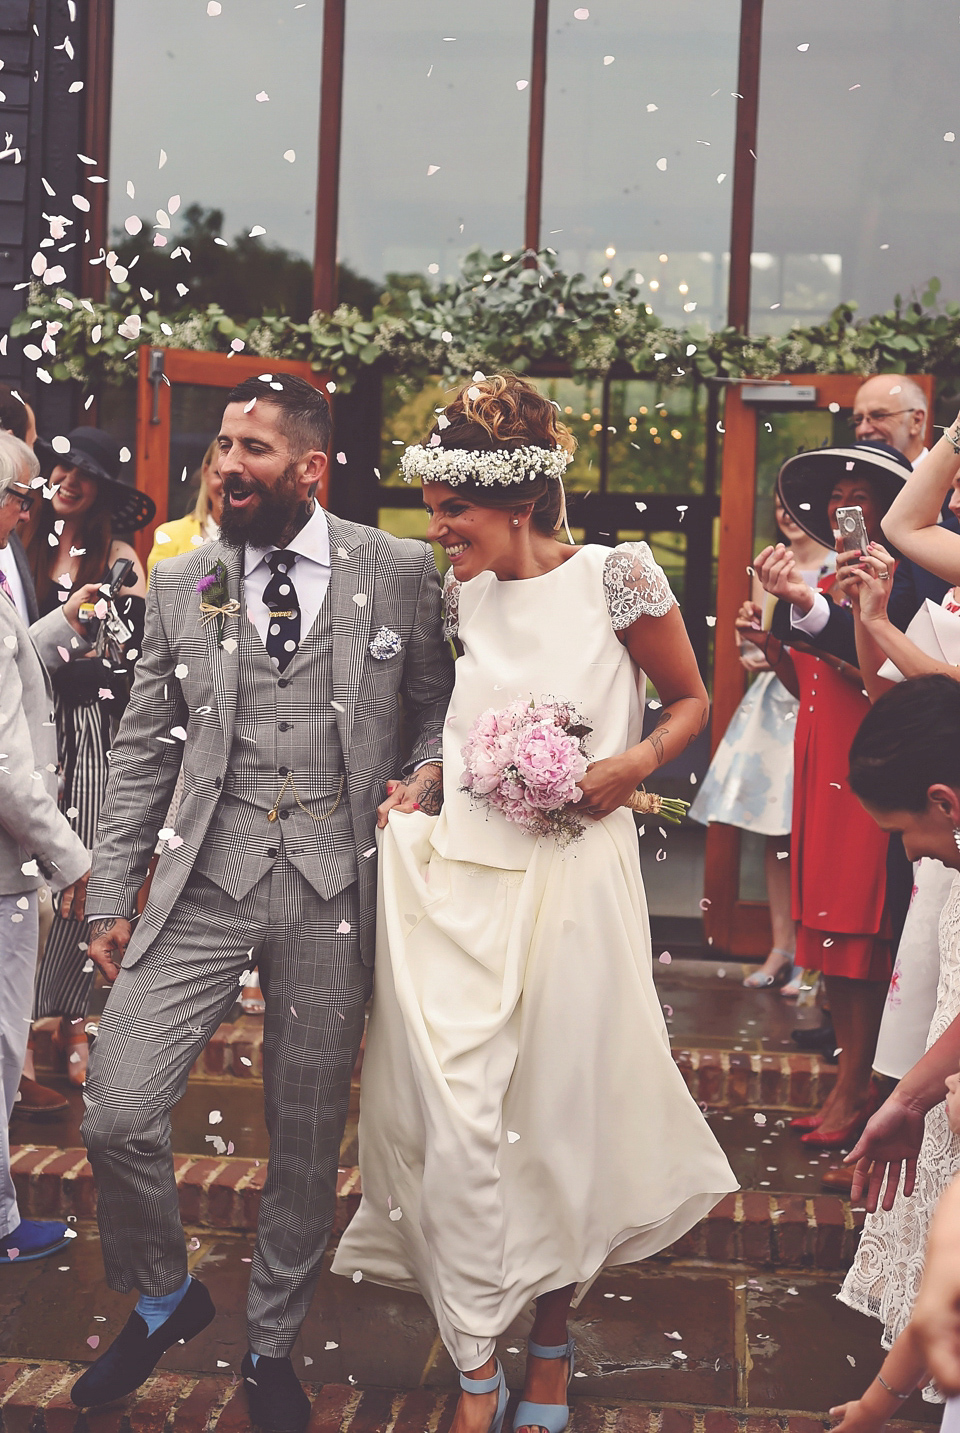 Bride Annie wore Laure de Sagazan separates for her laid back, boho-luxe inspired barn wedding.